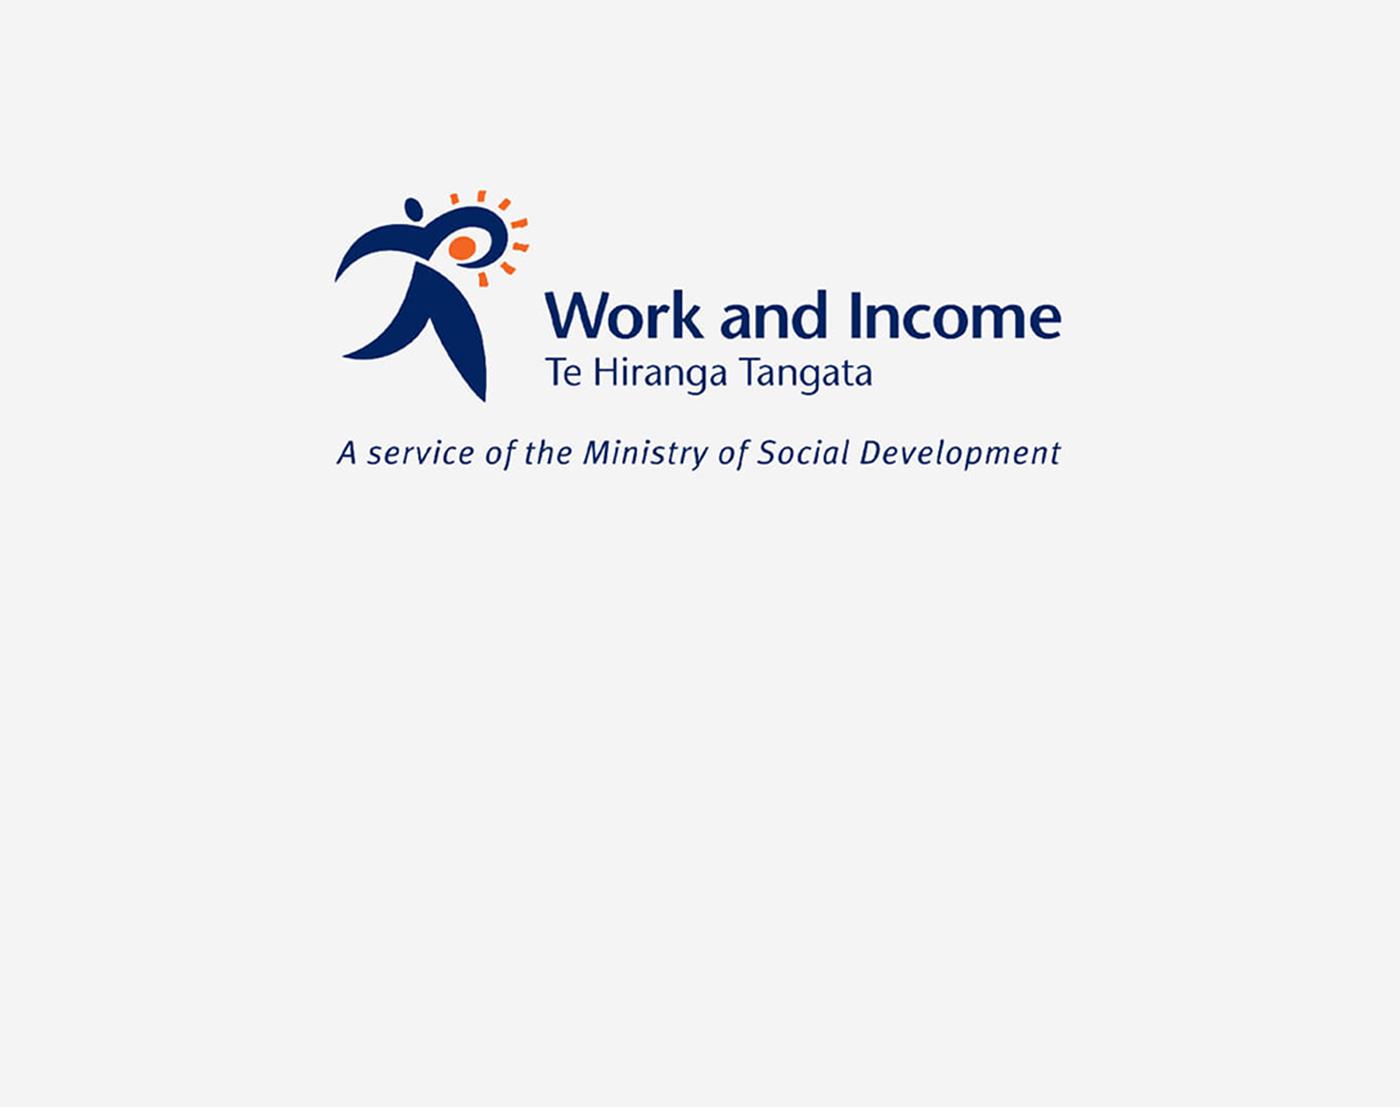 Work and income logo